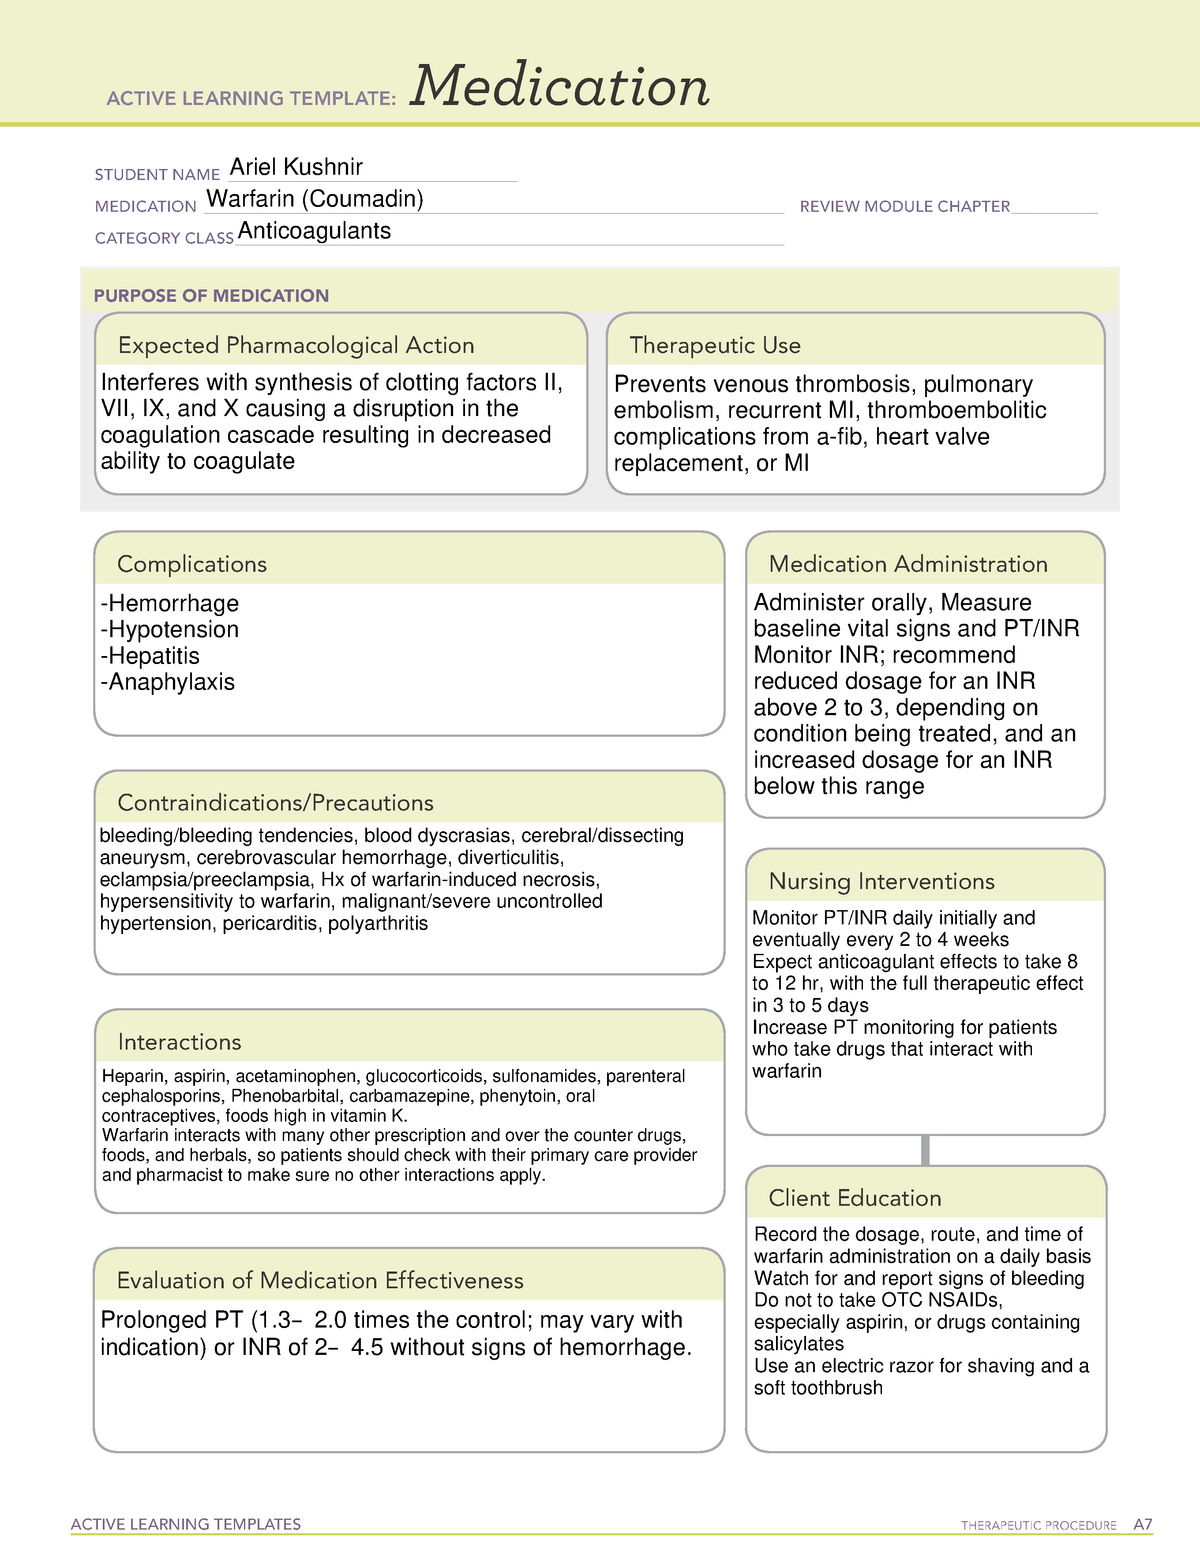 Warfarin med sheet ACTIVE LEARNING TEMPLATES THERAPEUTIC PROCEDURE A